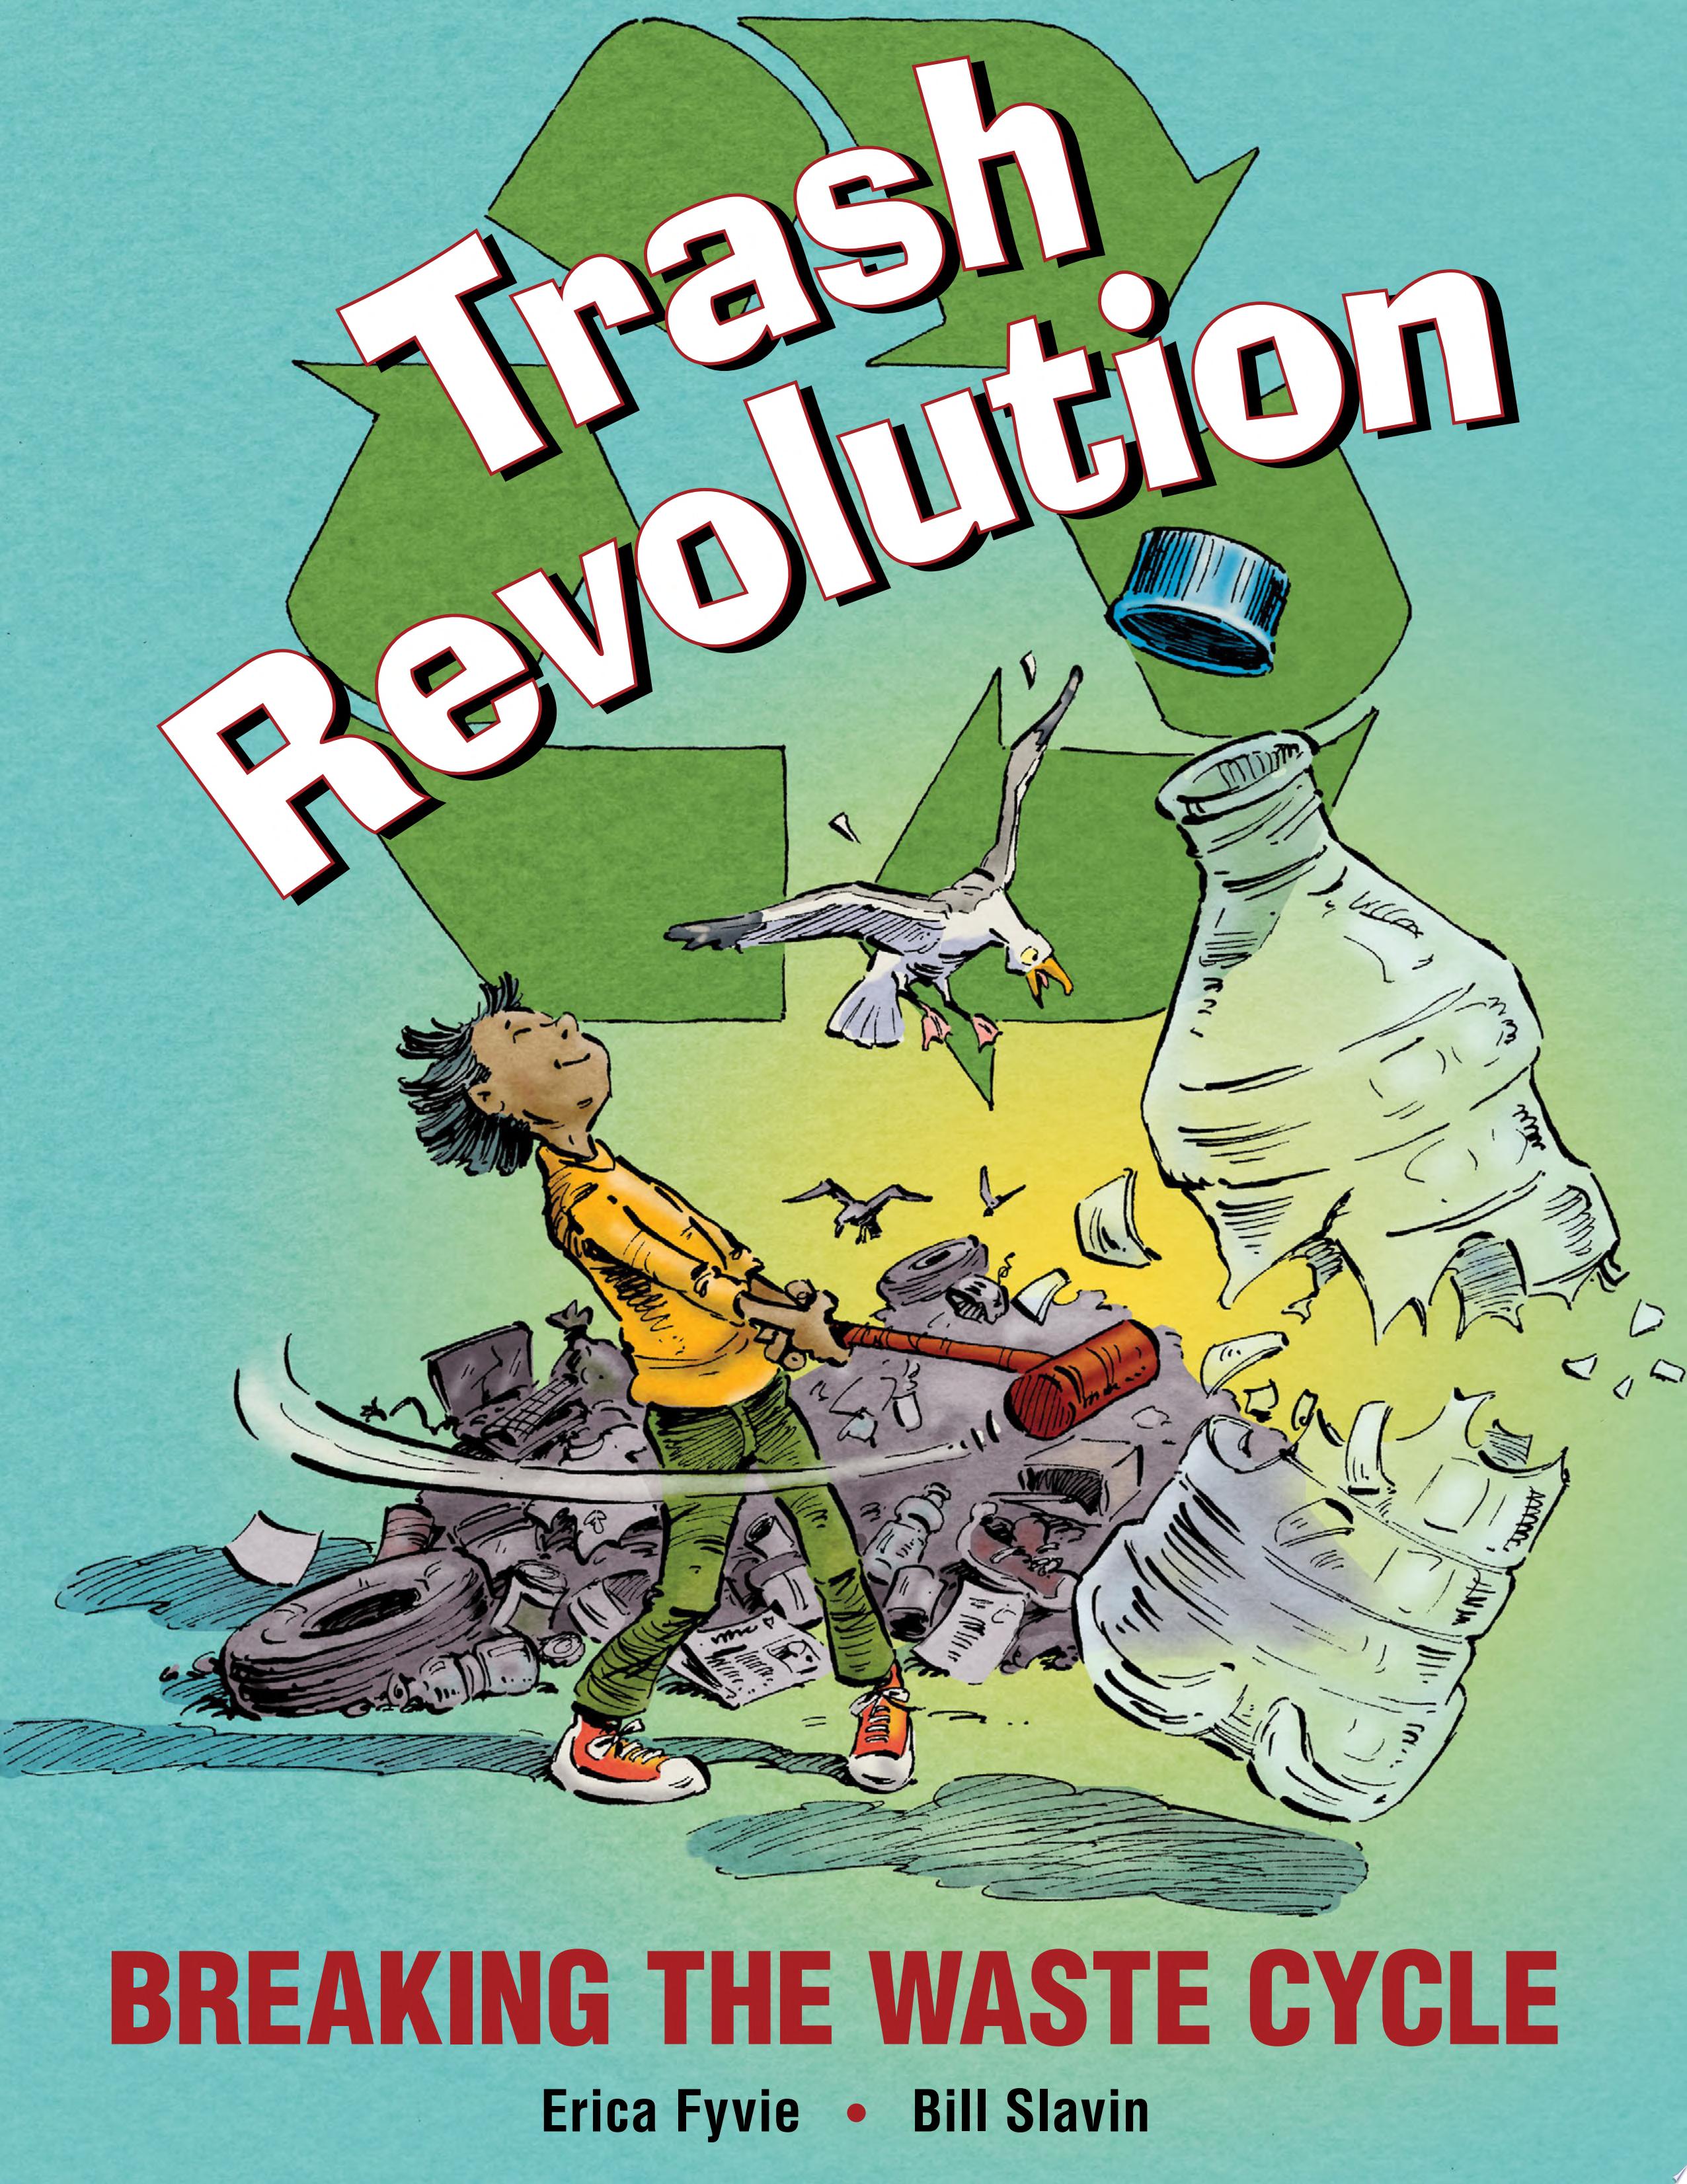 Image for "Trash Revolution: breaking the waste cycle"